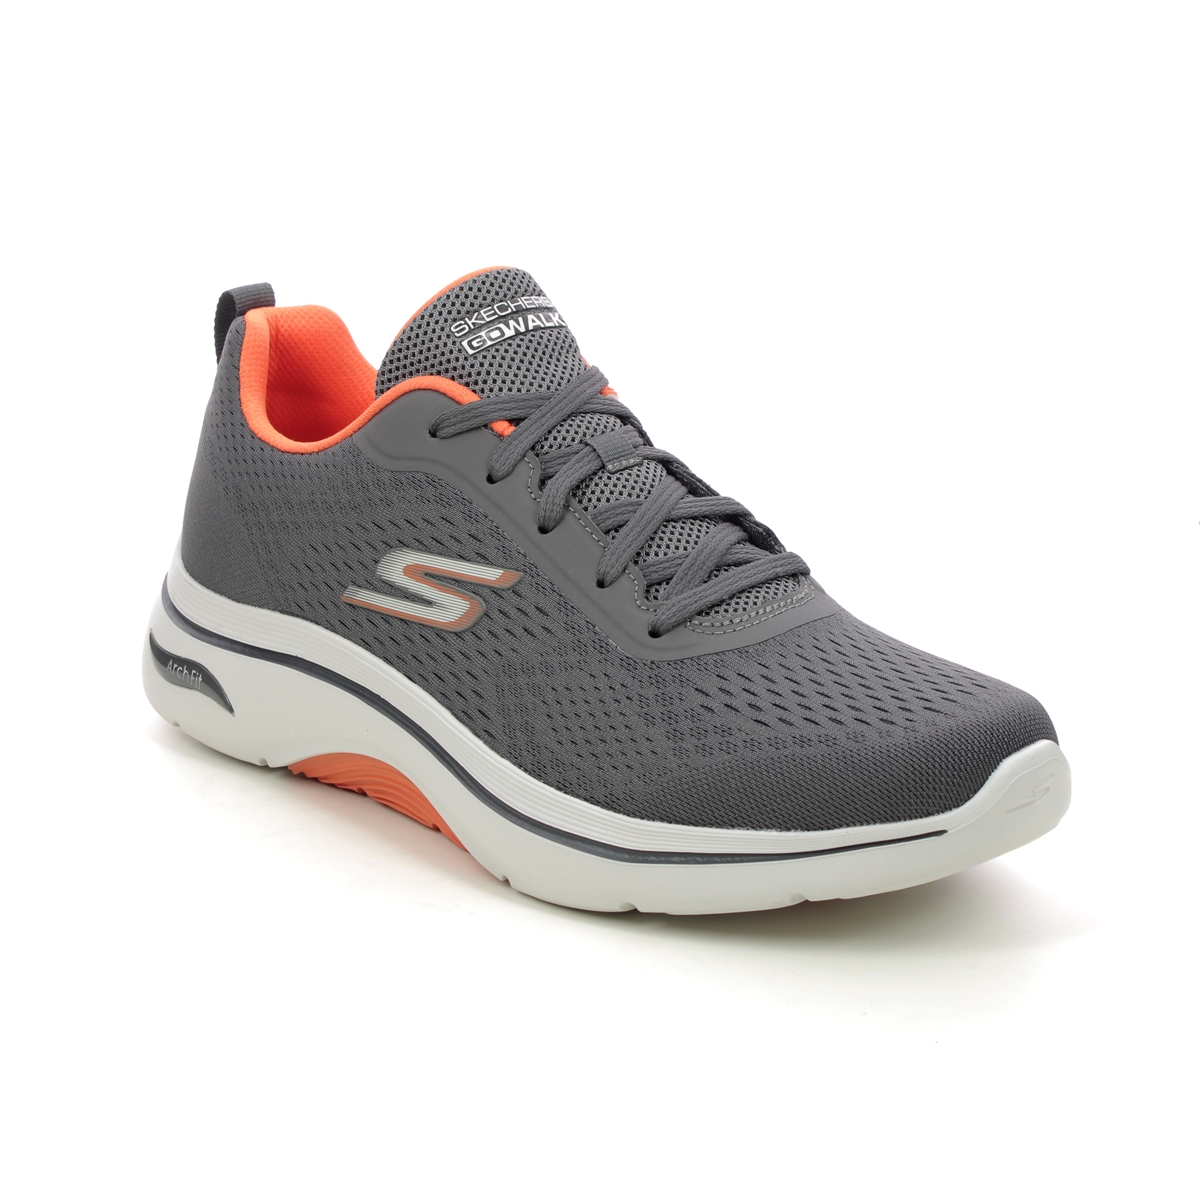 Skechers Arch Fit 2 Go Walk 7 CCOR Charcoal grey Mens trainers 216516 in a Plain Textile in Size 7